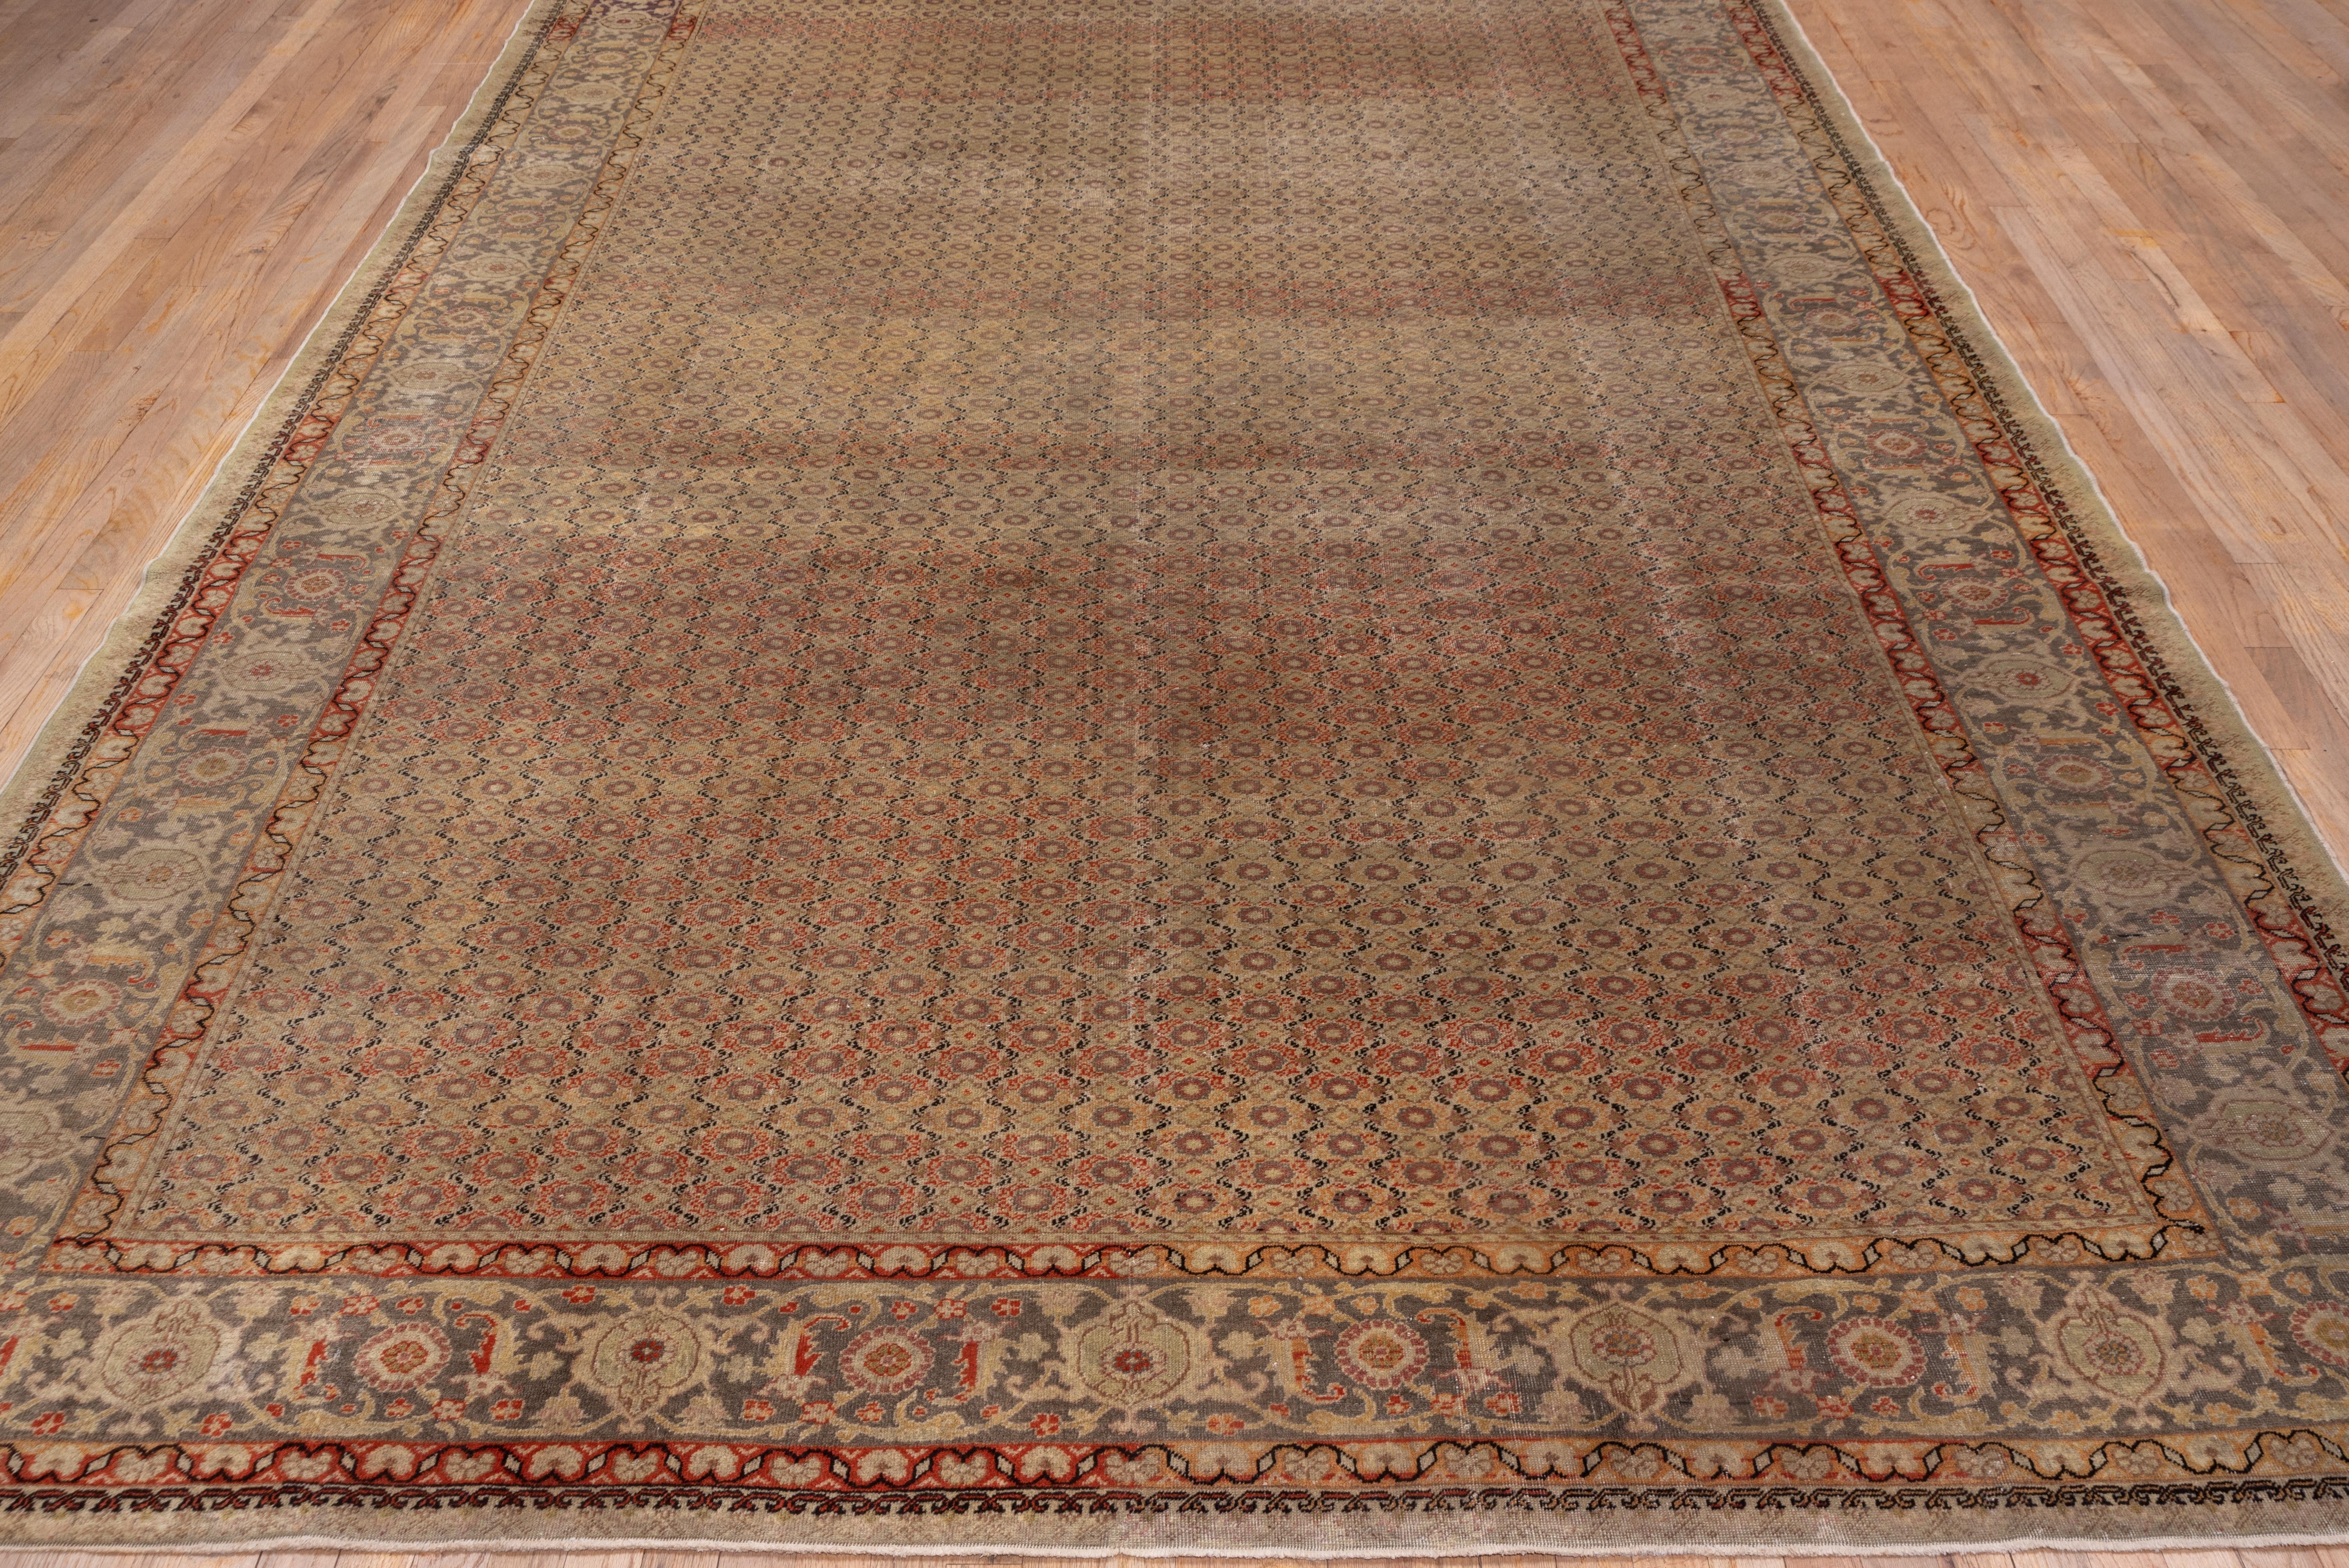 A Sivas strongly in the Tabriz style in both pattern and texture. The well-abrashed light brown field shows a very close all-over brown semi-lattice and rosette pattern clearly adapted from a textile. The Tabriz manner continued with the light